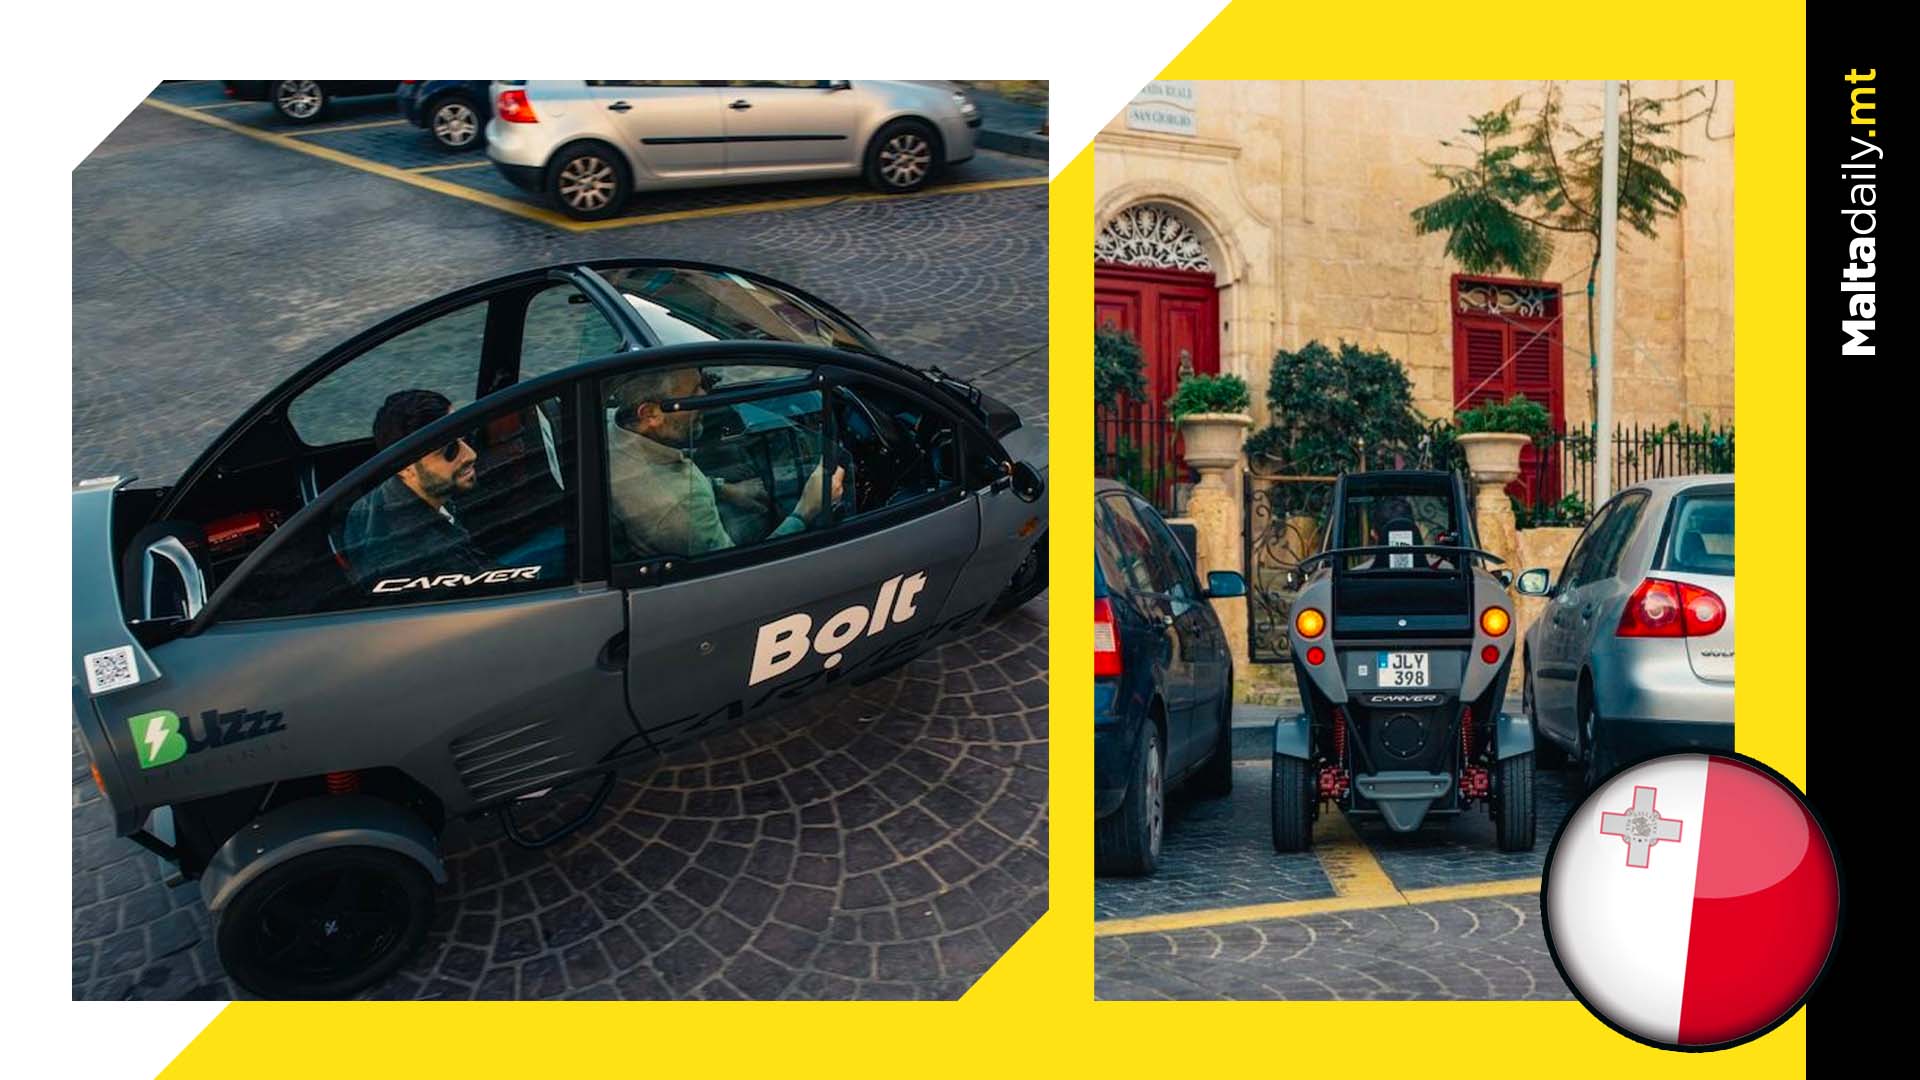 First look at Bolt's small taxis as they take to Maltese roads